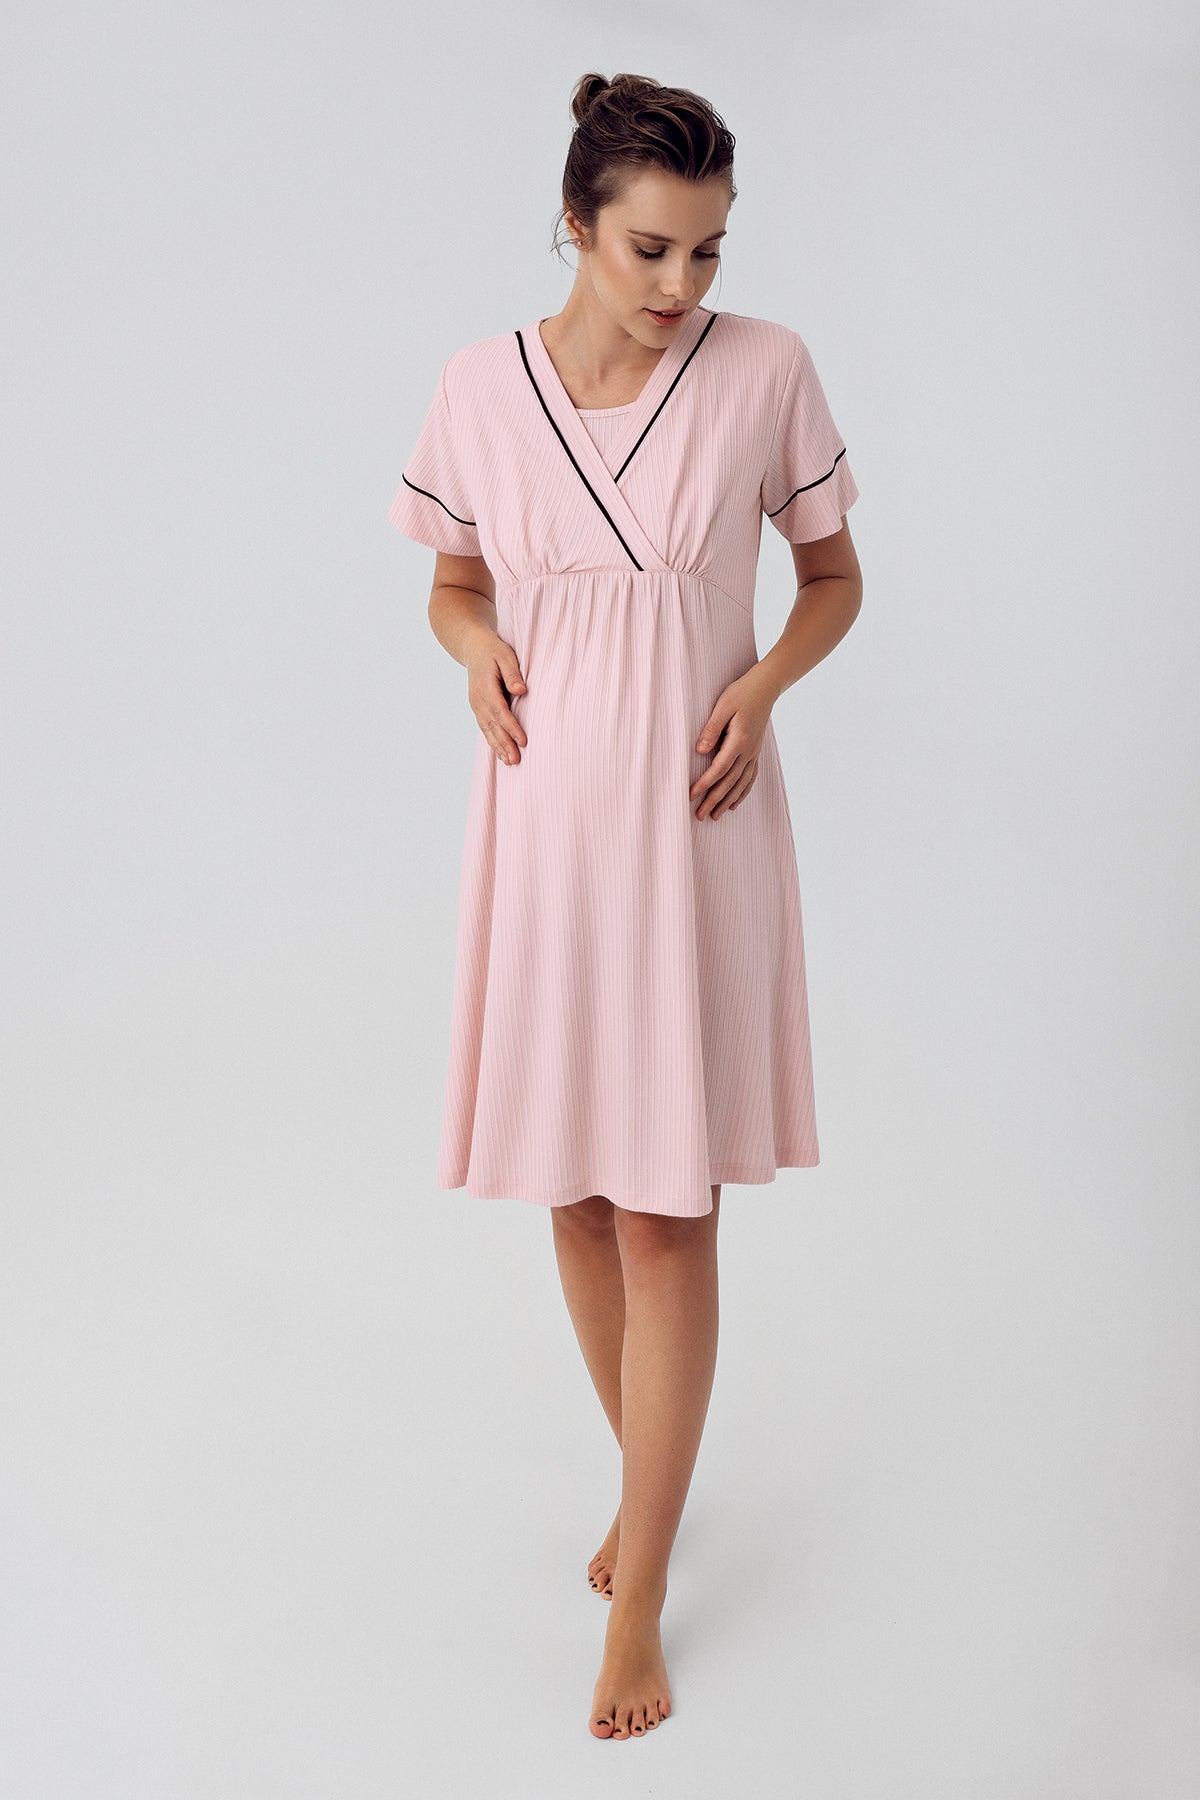 Shopymommy 16102 Double Breasted Maternity & Nursing Nightgown Pink